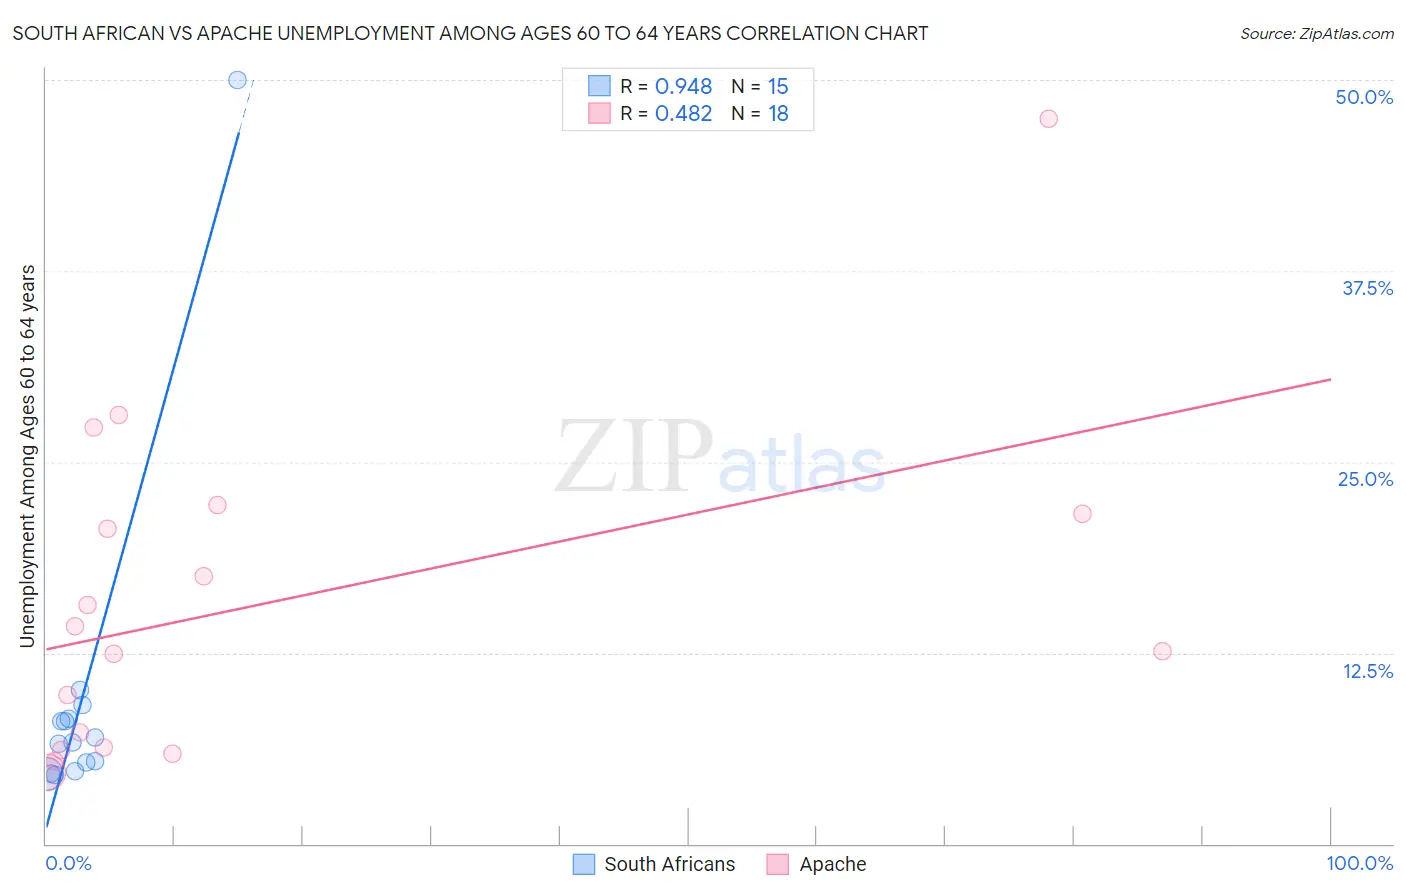 South African vs Apache Unemployment Among Ages 60 to 64 years